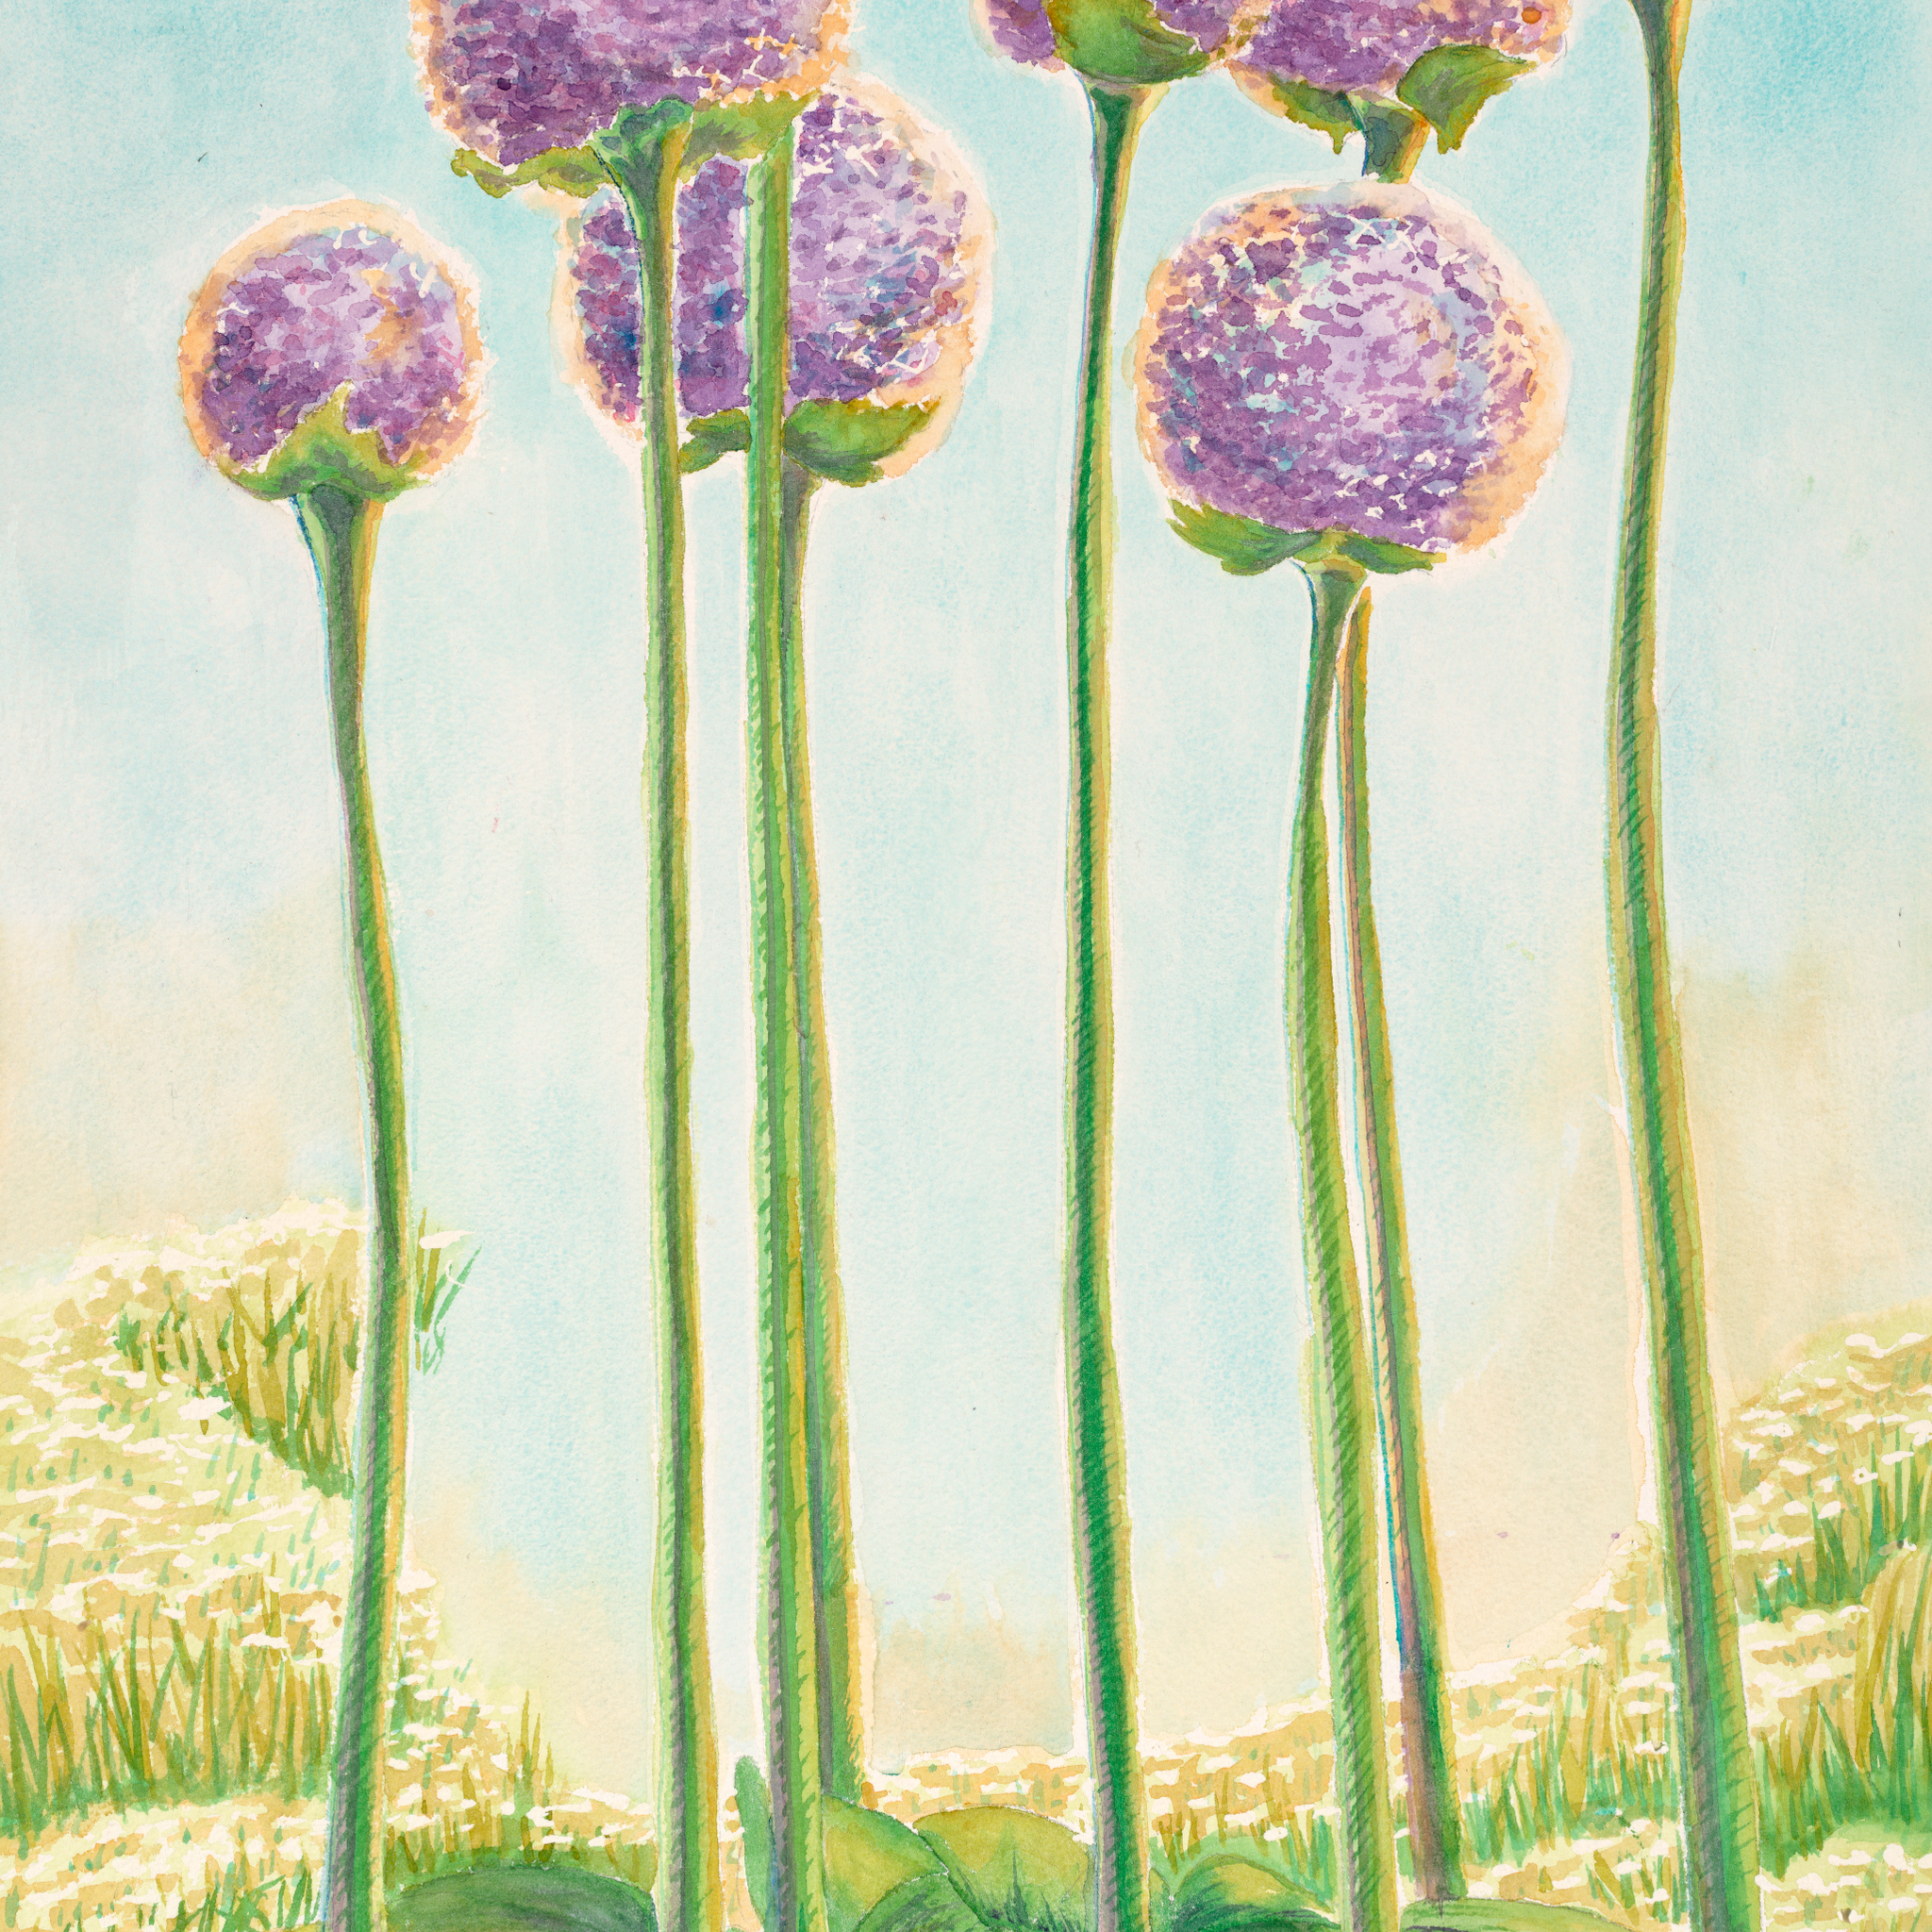 Signs of Spring, Watercolor Print